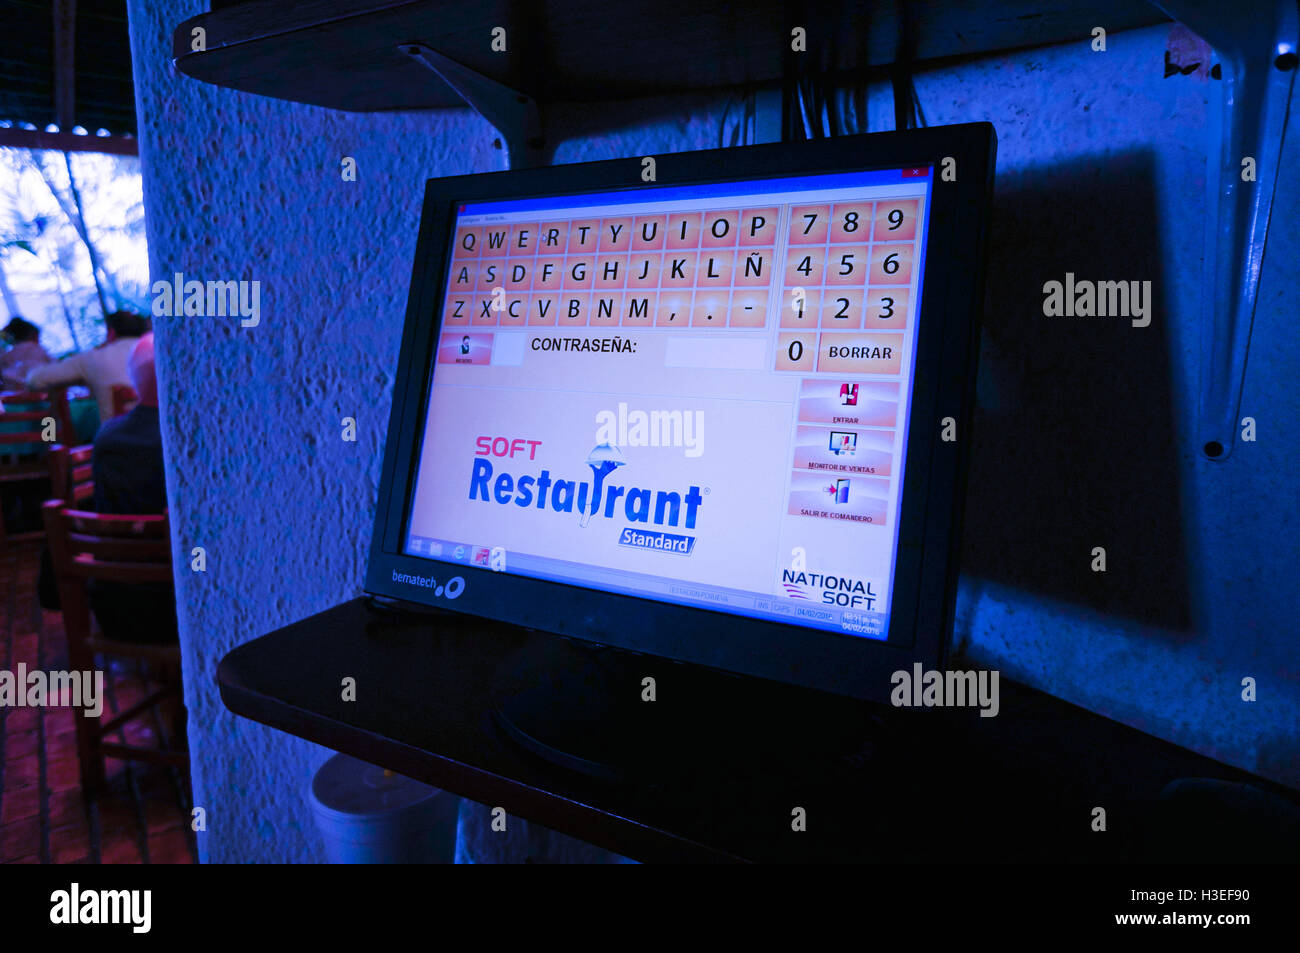 POS (Point of sale) screen in restaurant for ordering food and billing customers. Stock Photo